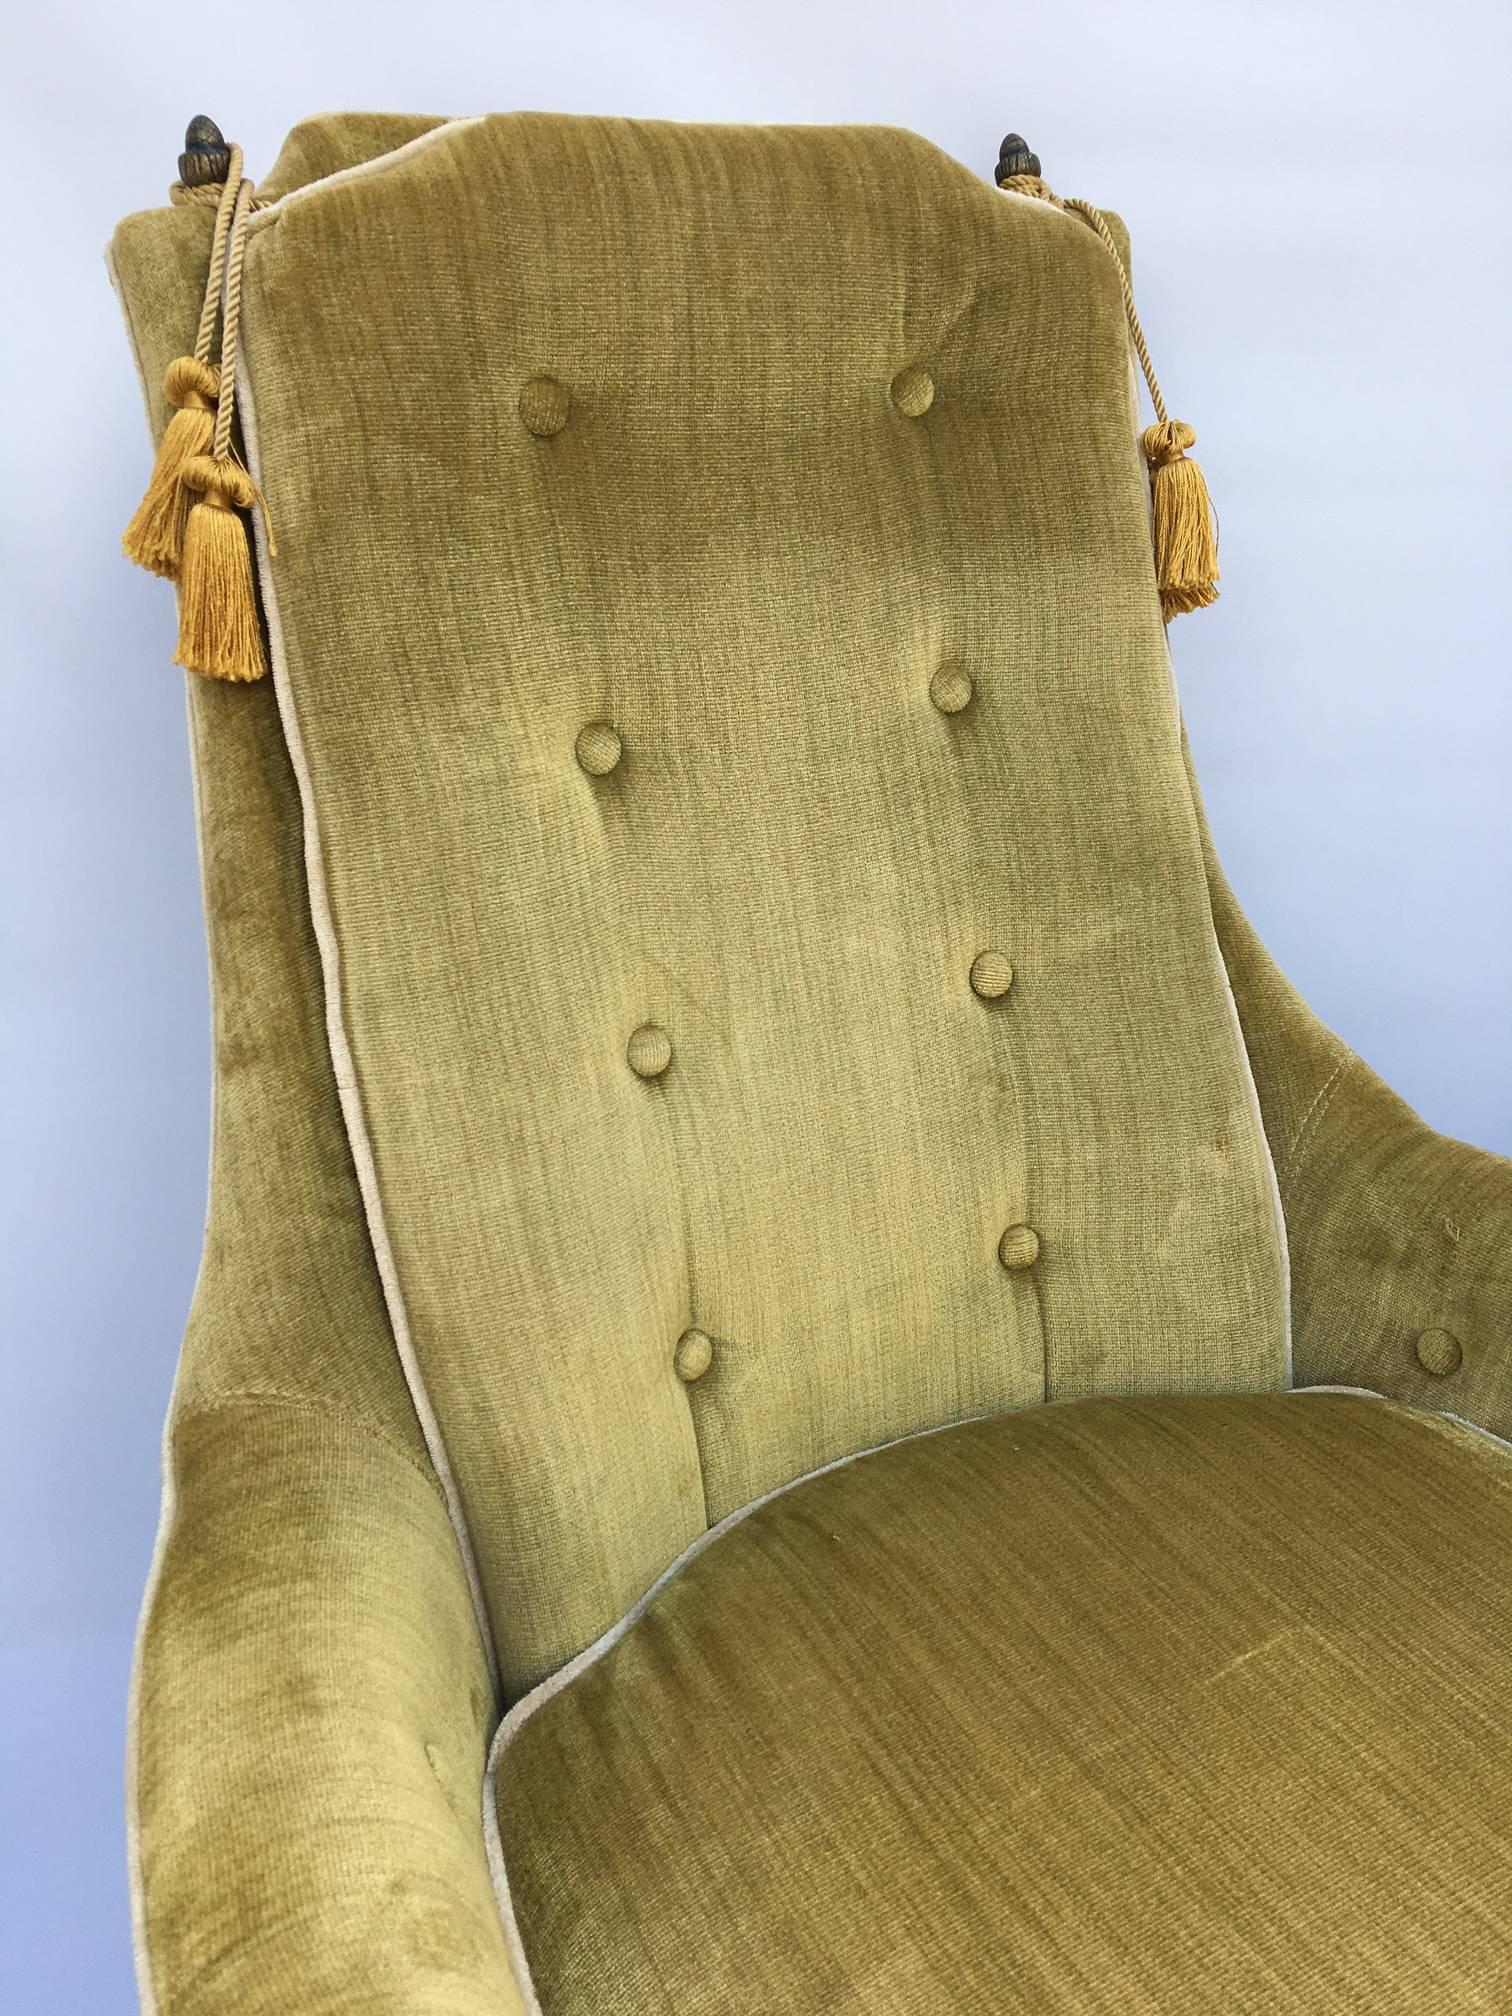 Perfect touch of Hollywood Regency in any home, these green velvet chairs by Perfection Furniture Company are adorned with brass finials and gold tassels. White piping accents. Excellent vintage condition with just one small fabric tear on rear of